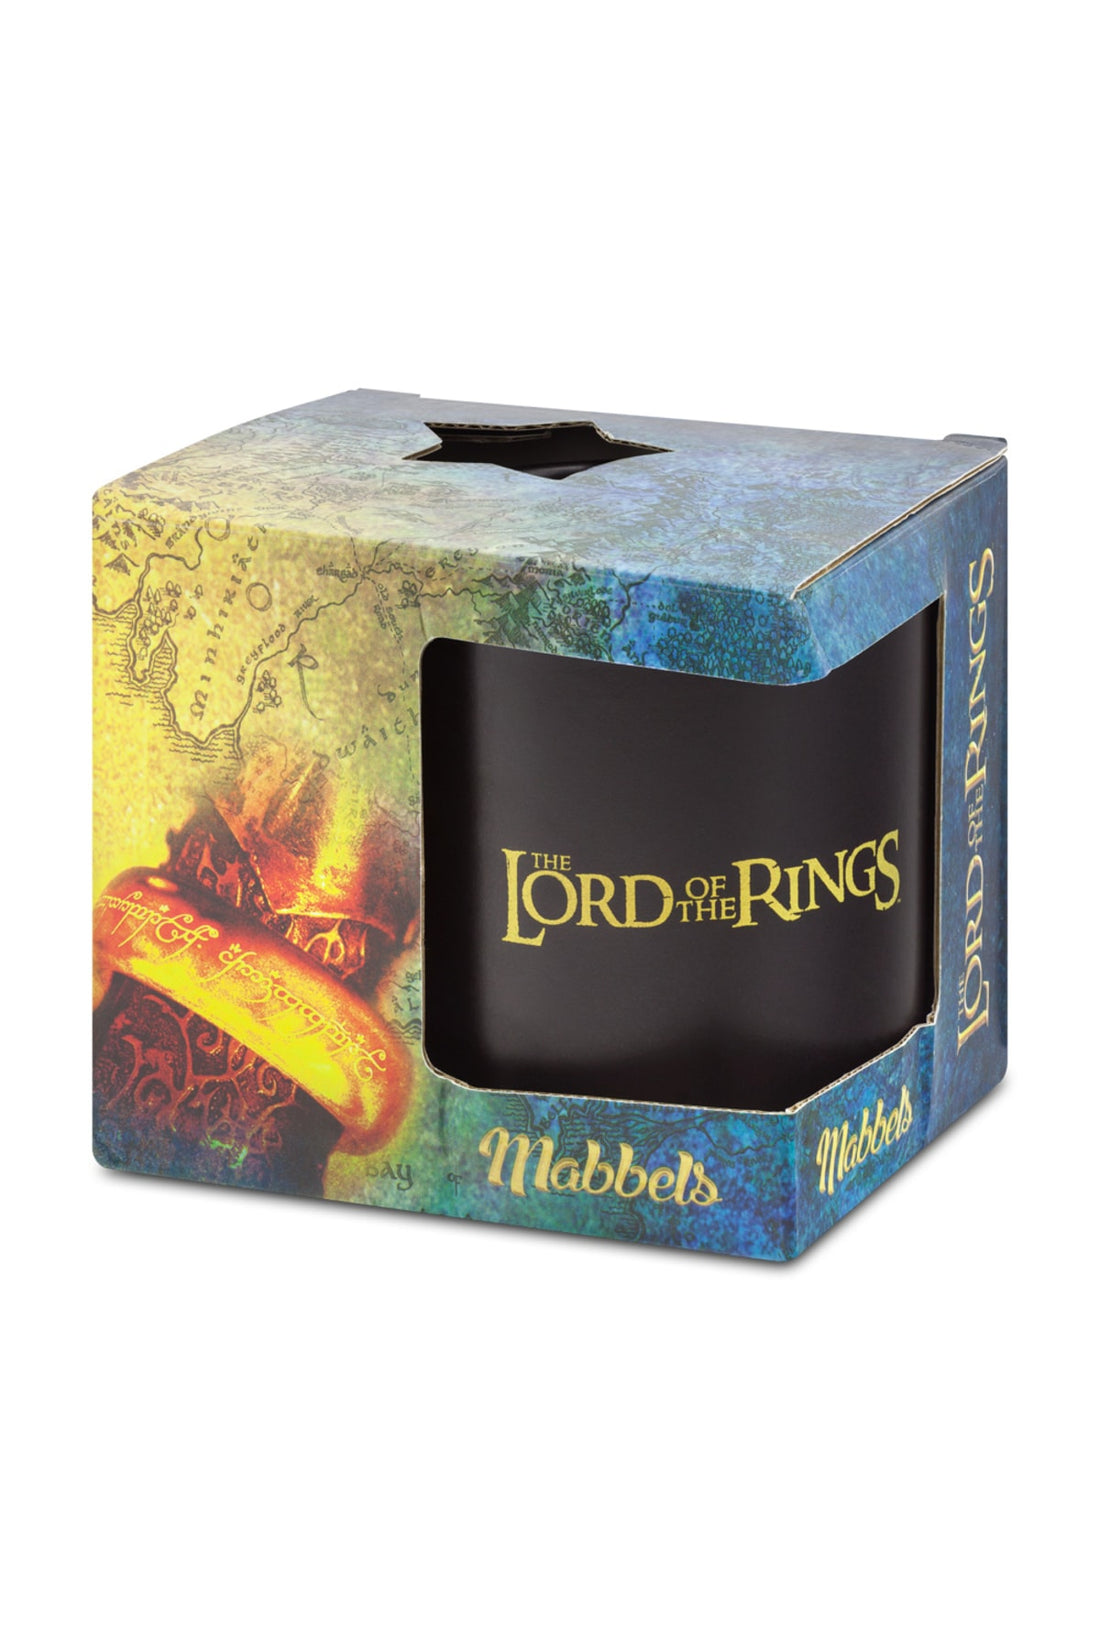 The Lord of the Rings Mug LOTR